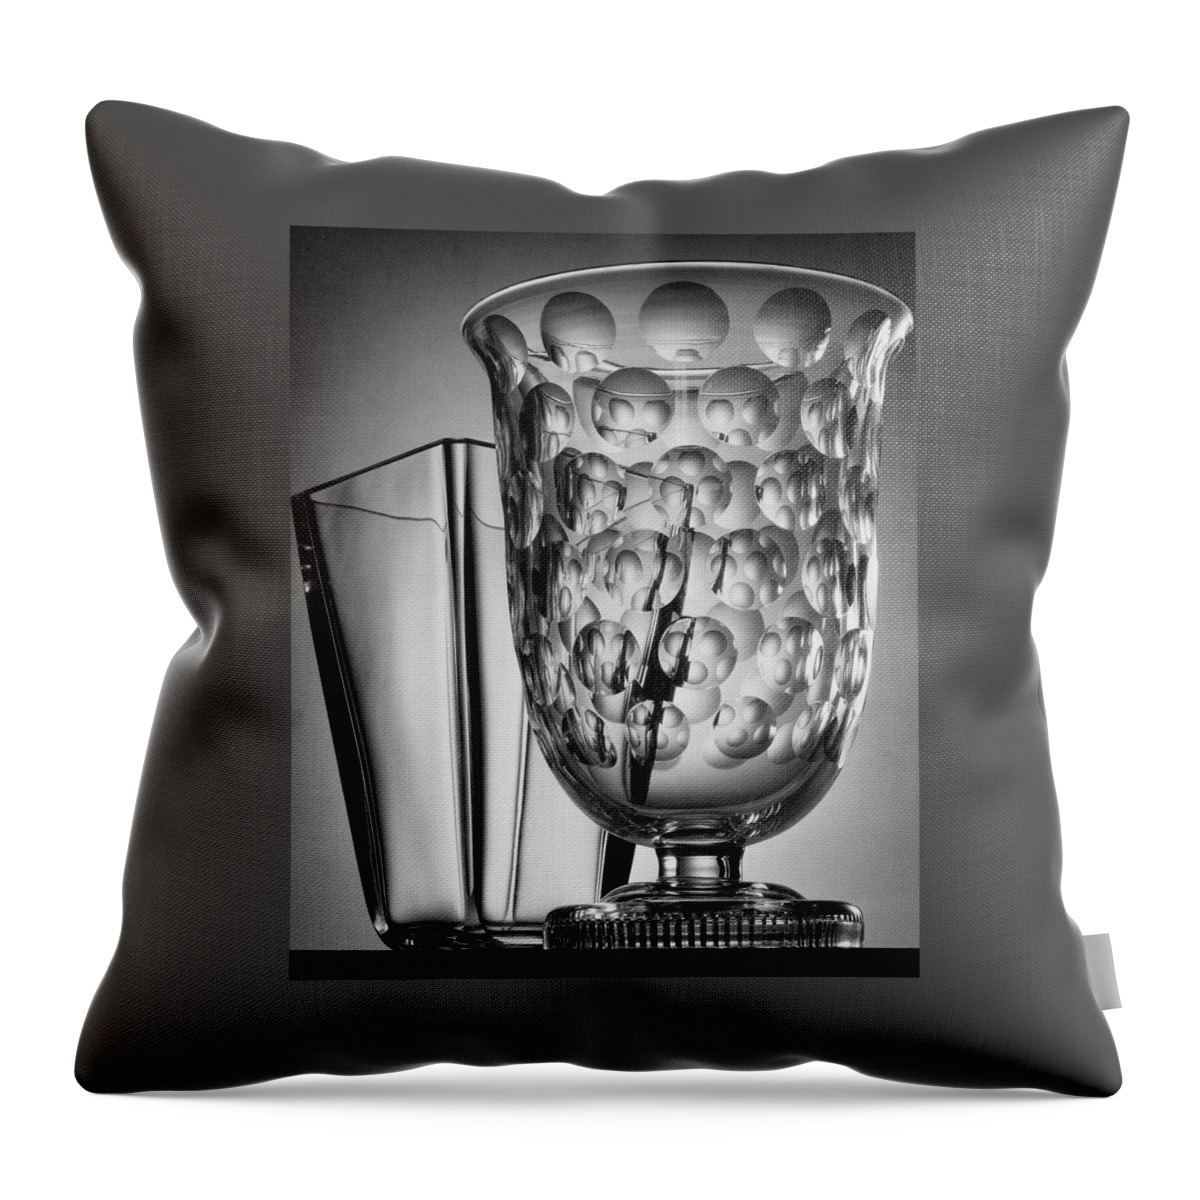 Crystal Vases From Steuben Throw Pillow